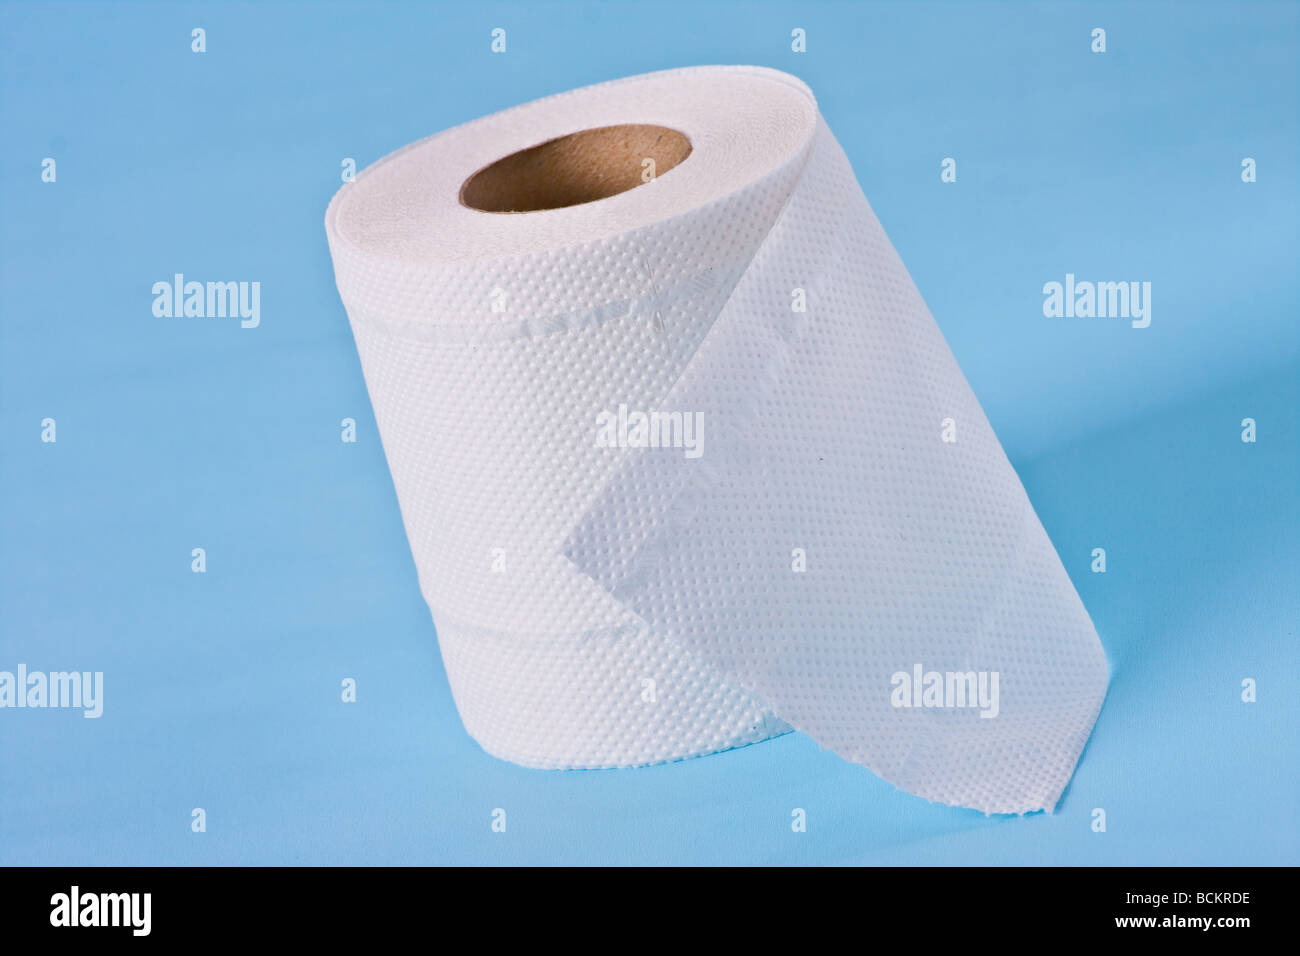 roll of a toilet paper Stock Photo